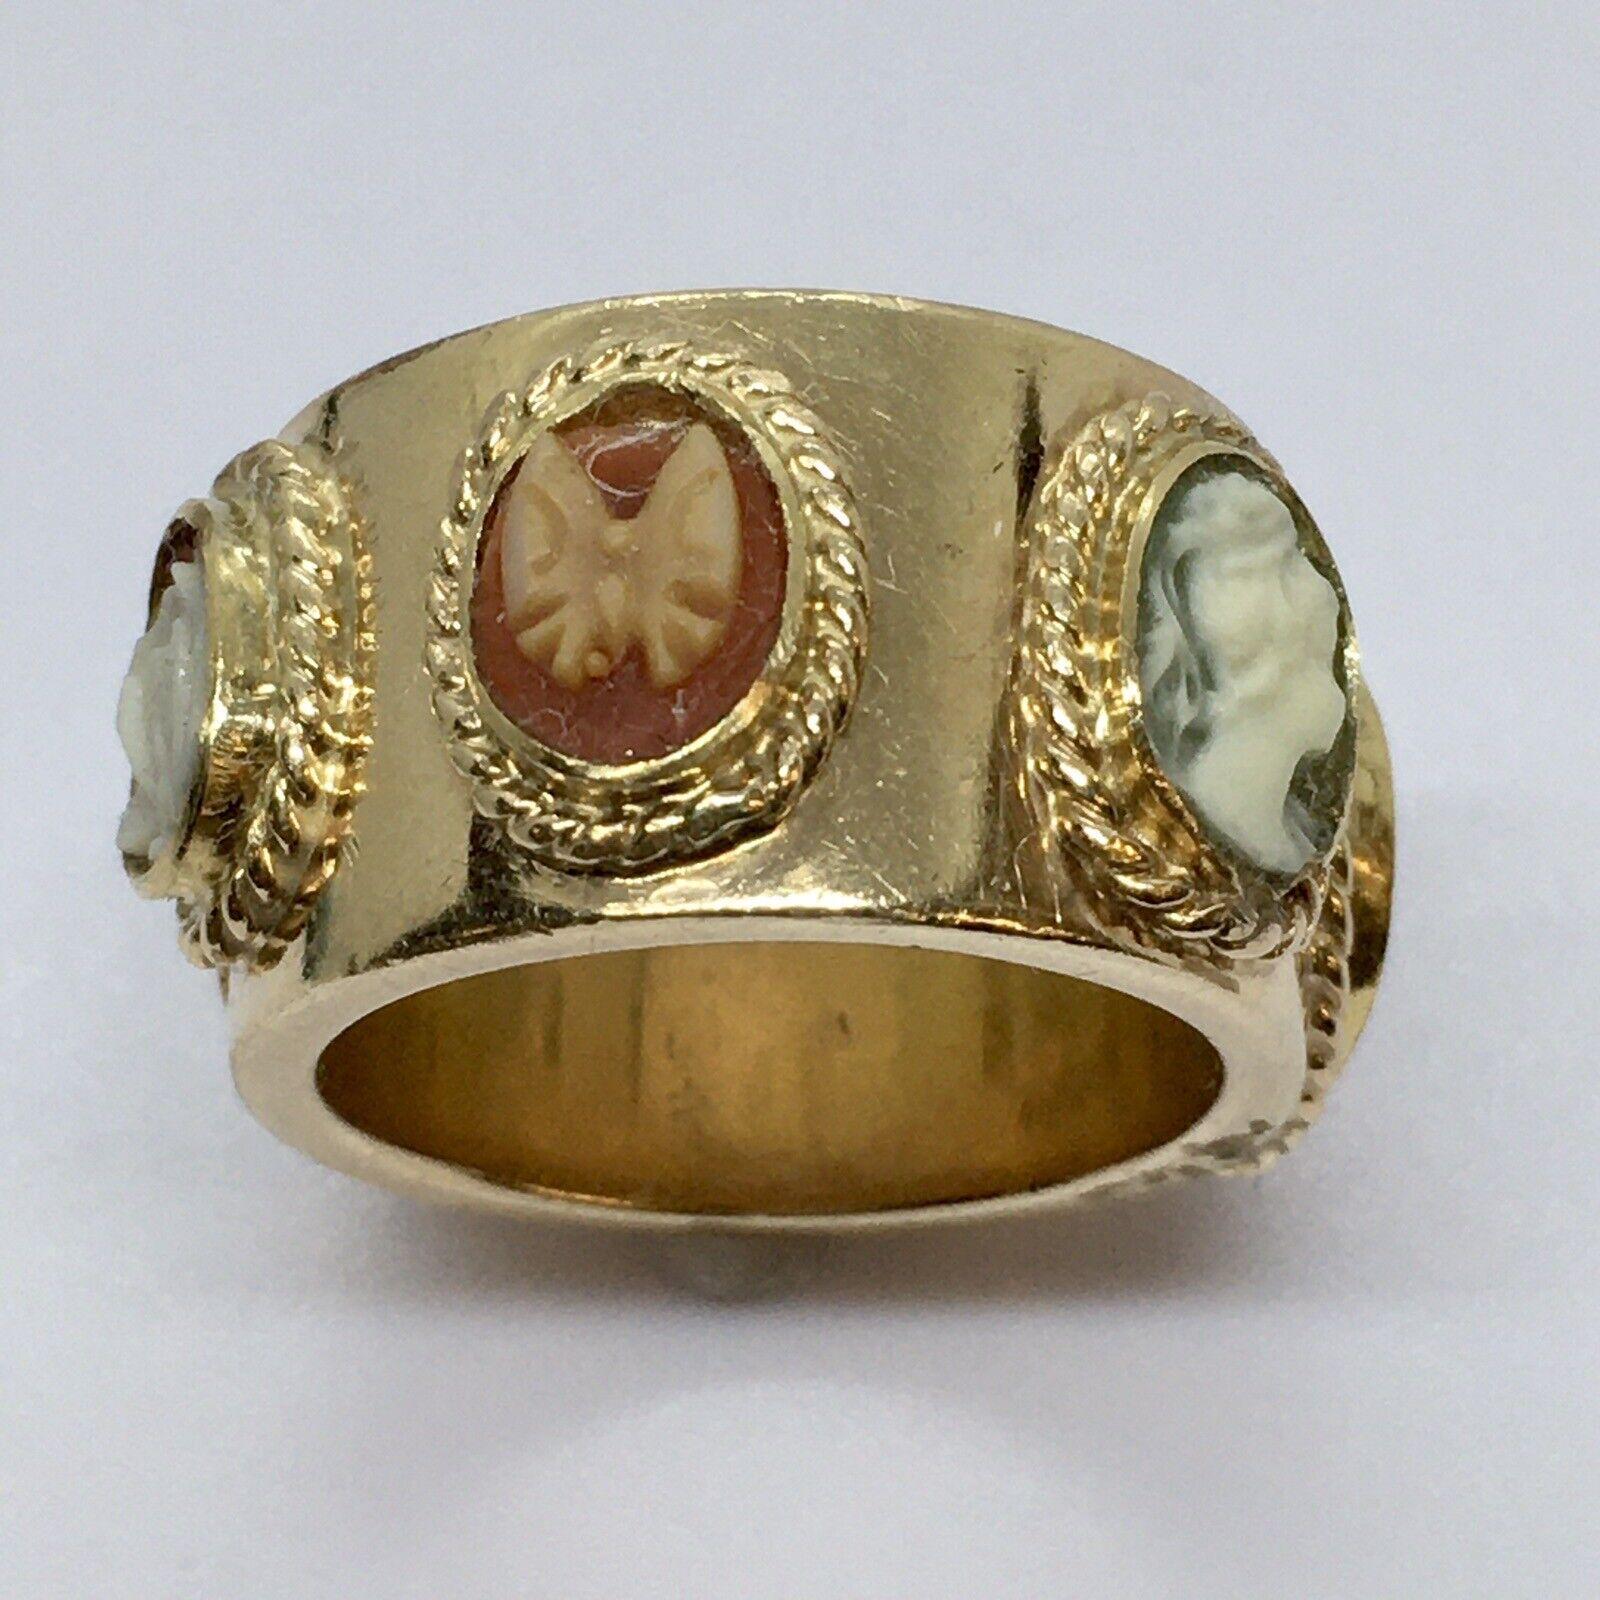 Art Deco 1920s Cameo Band Handmade Hallmarked 14K Gold


Hallmark , Marked 14K, acid tested
Size 6.5
12 mm wide, 2 mm thick band
6 cameos, no damage
Weighting 19.7 gram

Authentic and Original American antique in excellent condition considering the